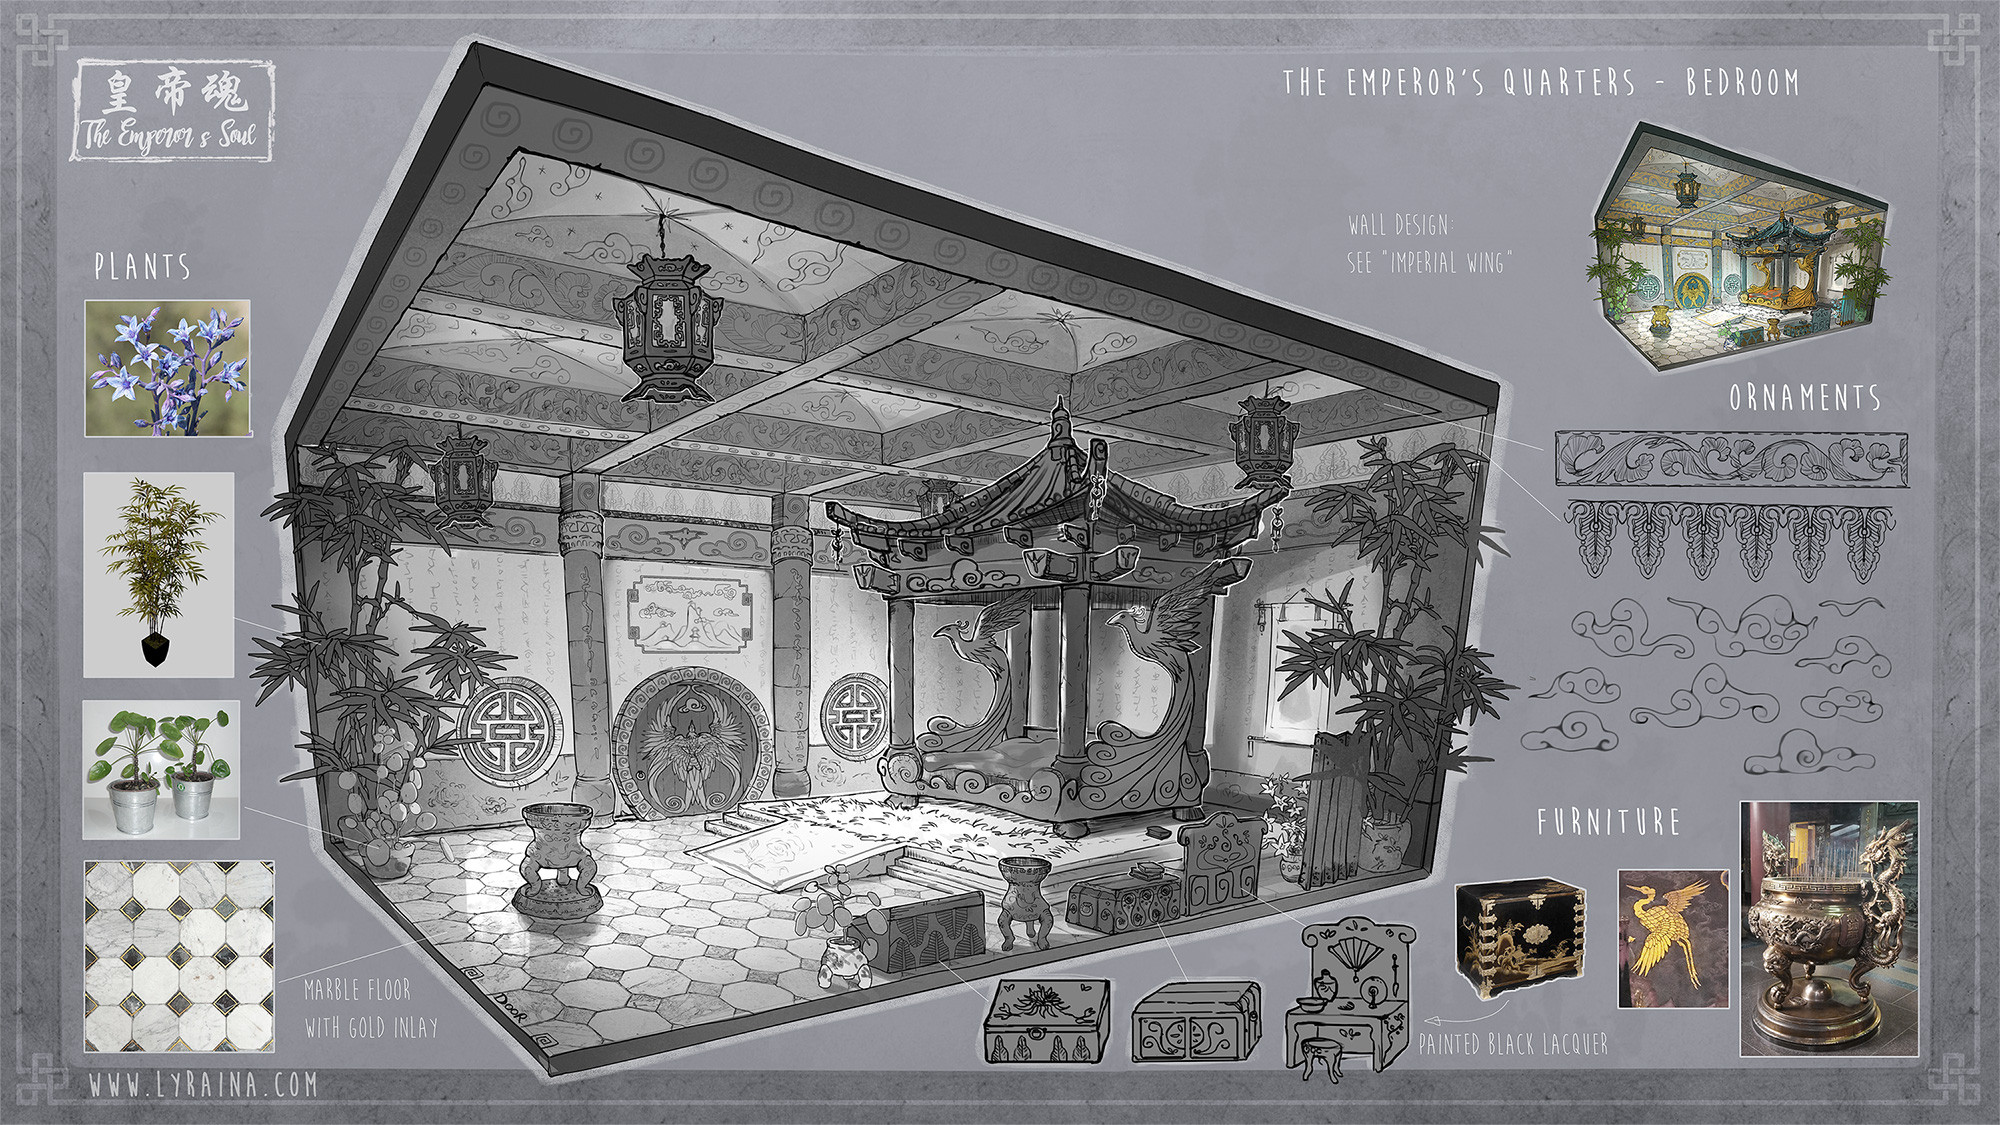 The imperial bedchamber. After his injury, The Emperor does not leave this place.